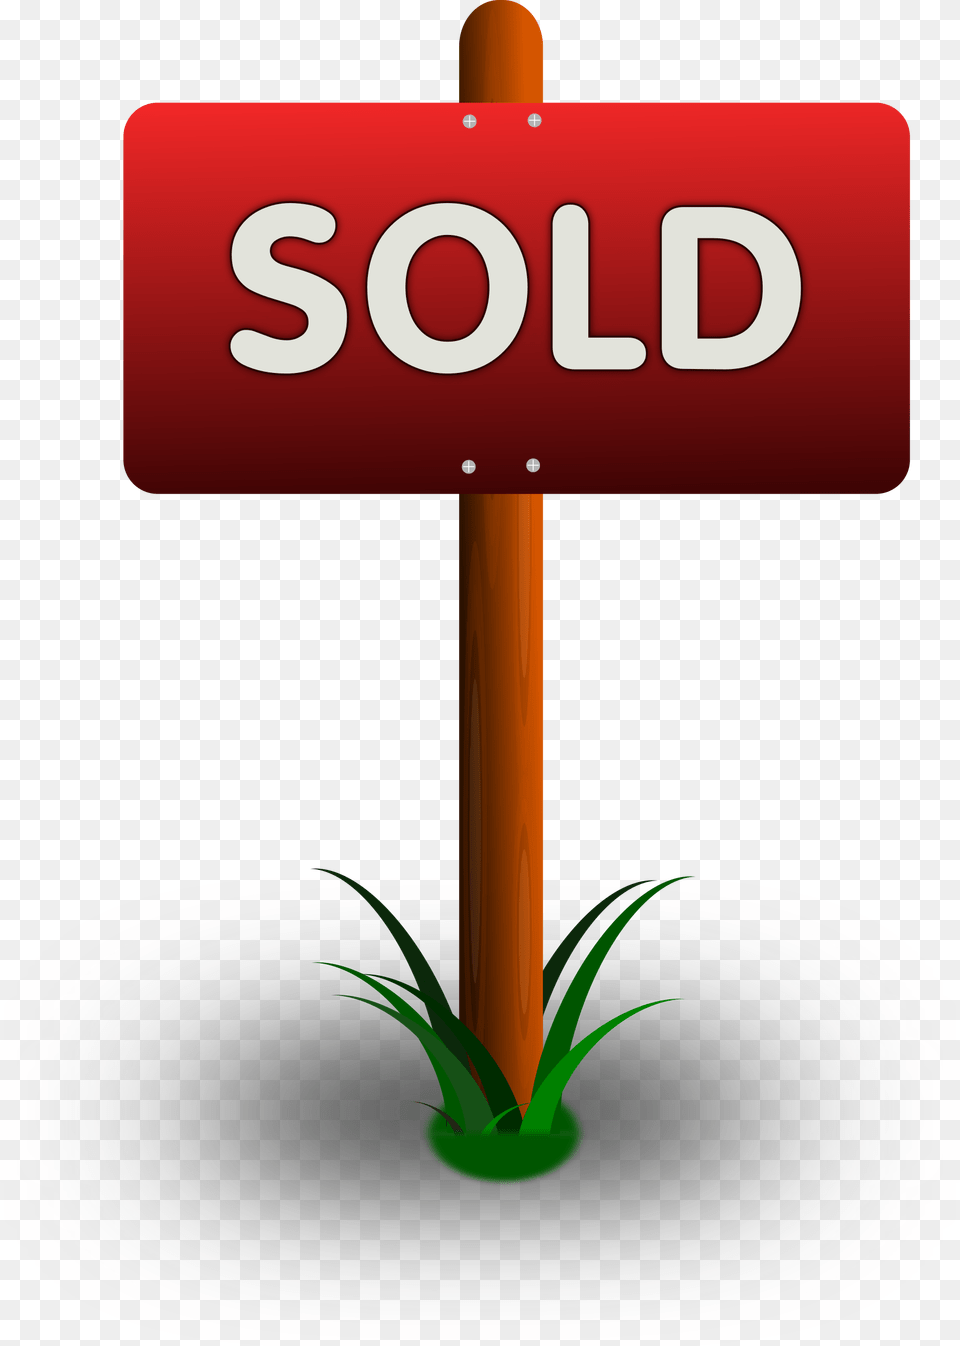 This Icons Design Of Sold Sign, Symbol, Road Sign, Stopsign Png Image